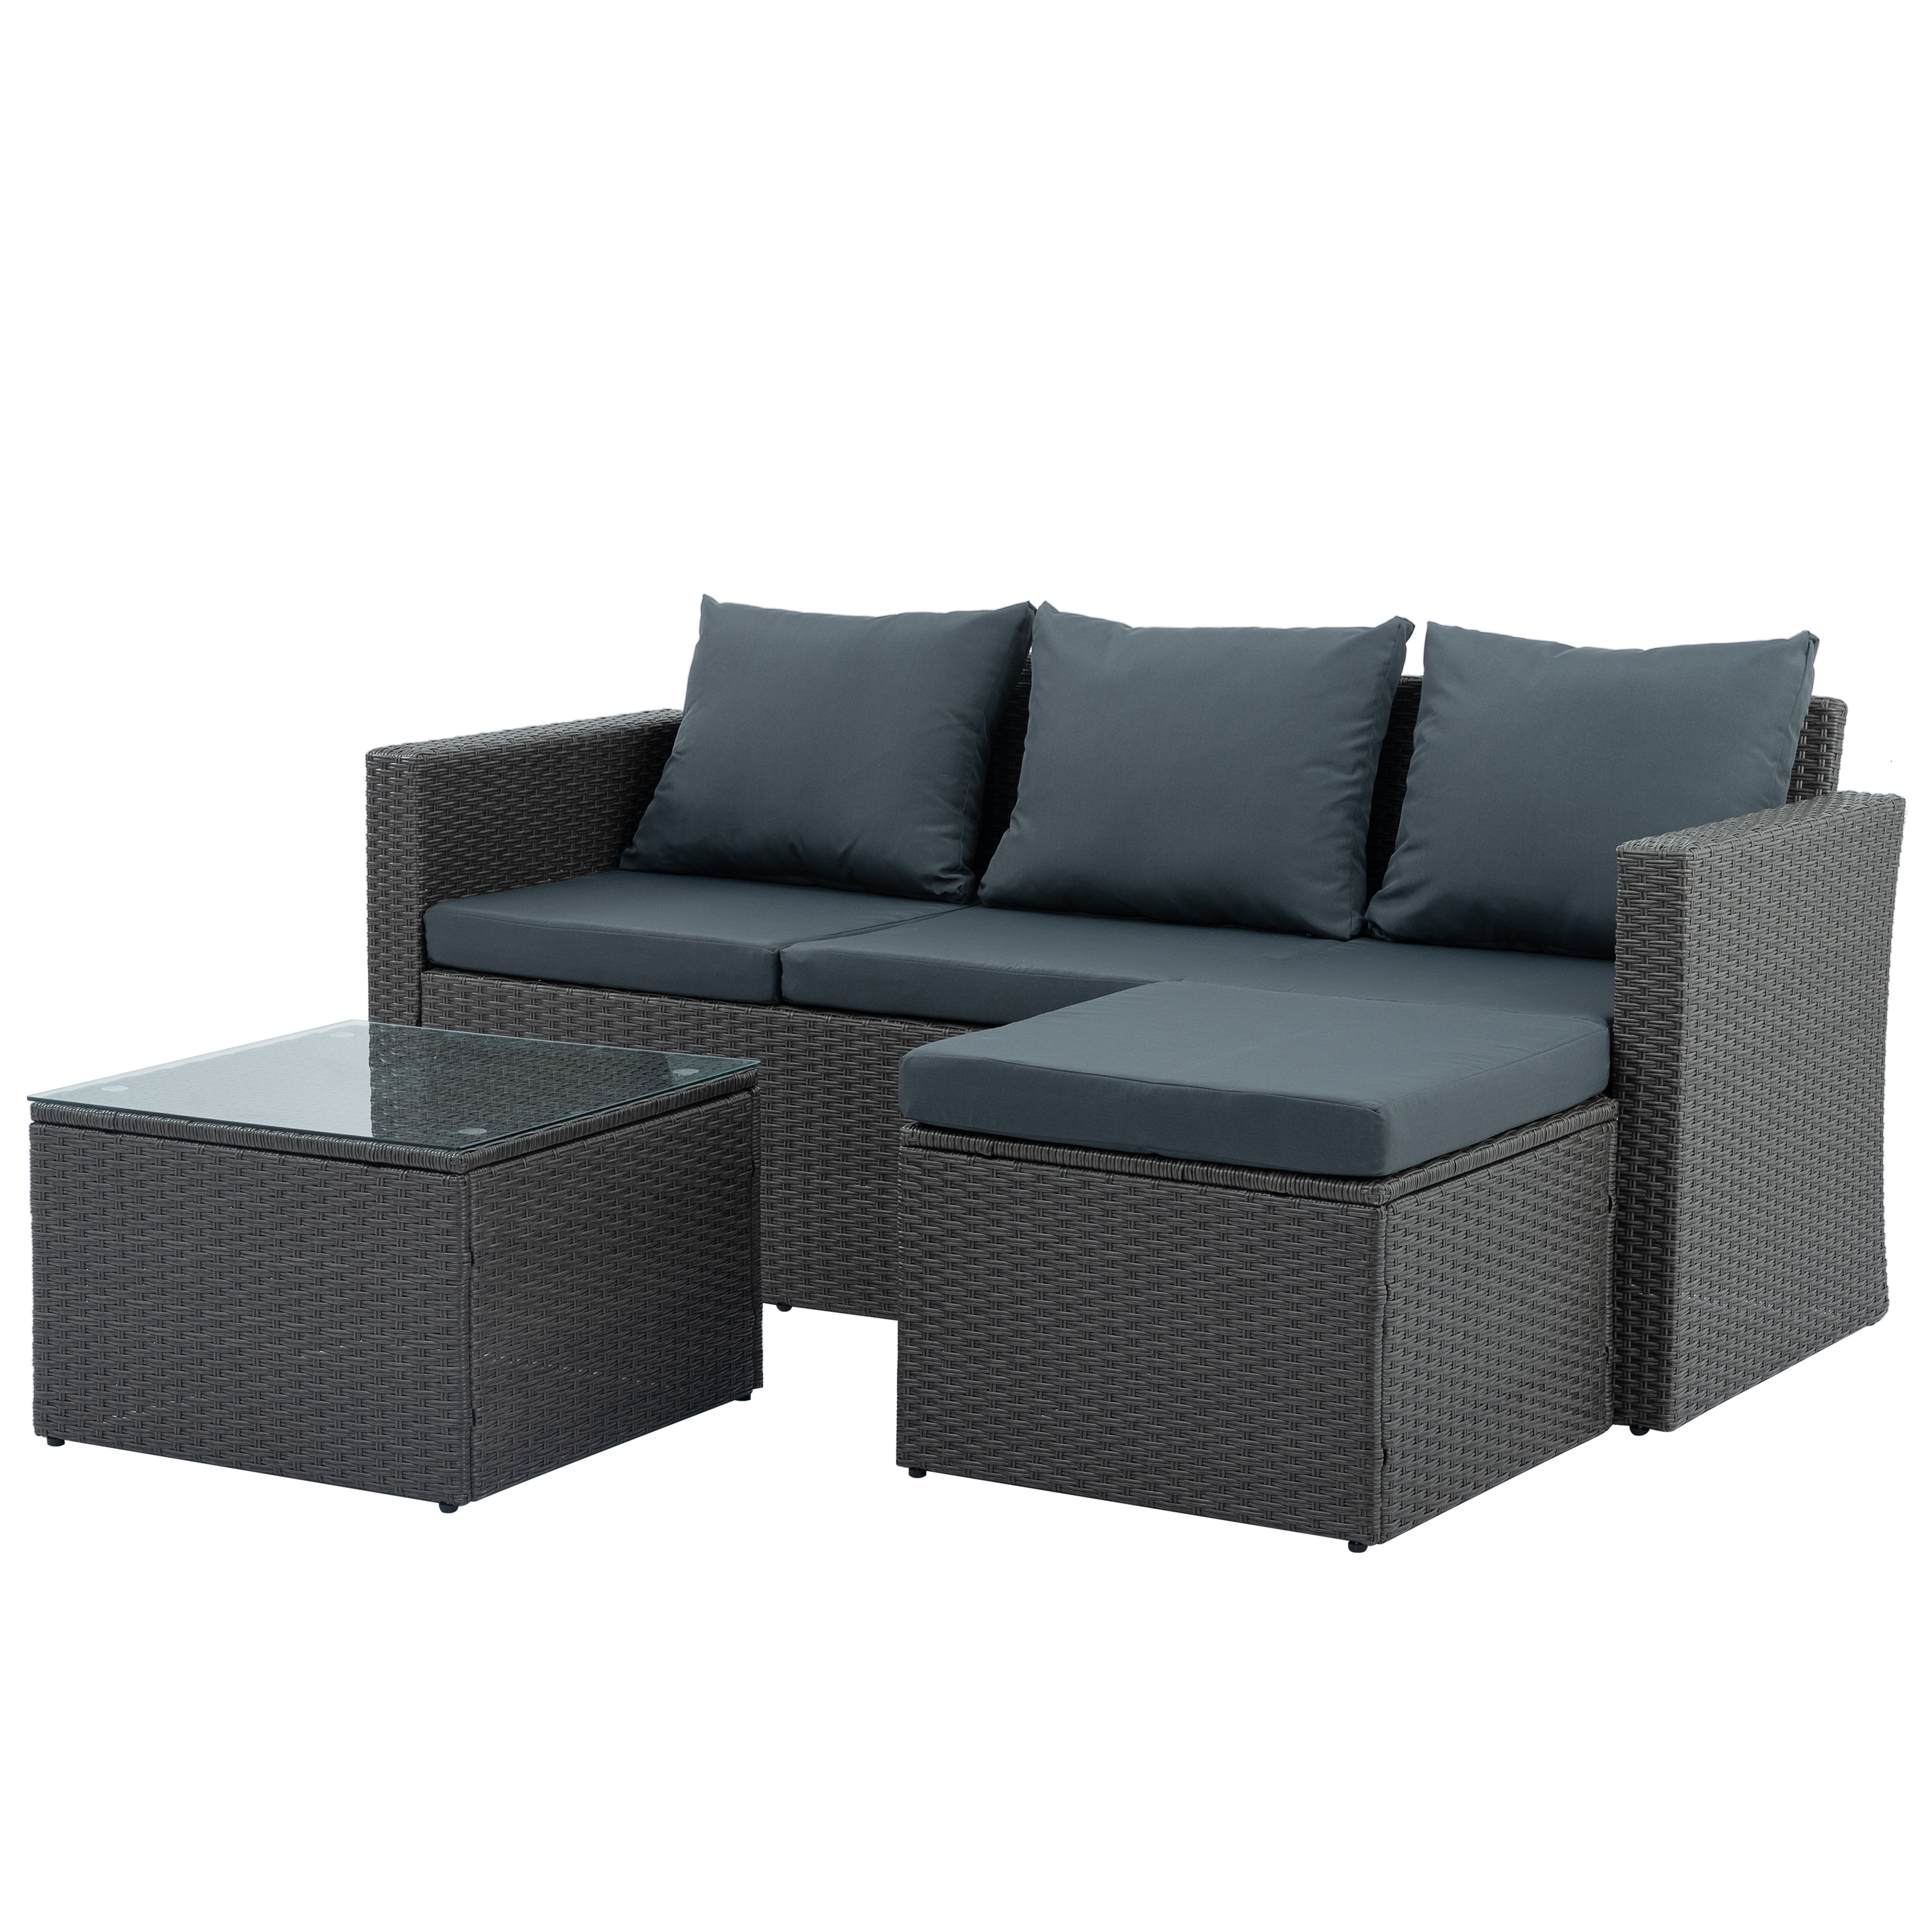 Rattan Patio Sofa Set, 3 Pieces Outdoor Sectional Furniture, All-Weather PE Rattan Wicker Patio Conversation, Cushioned Sofa with Glass Table & Ottoman for Patio Garden Poolside Deck - image 4 of 10